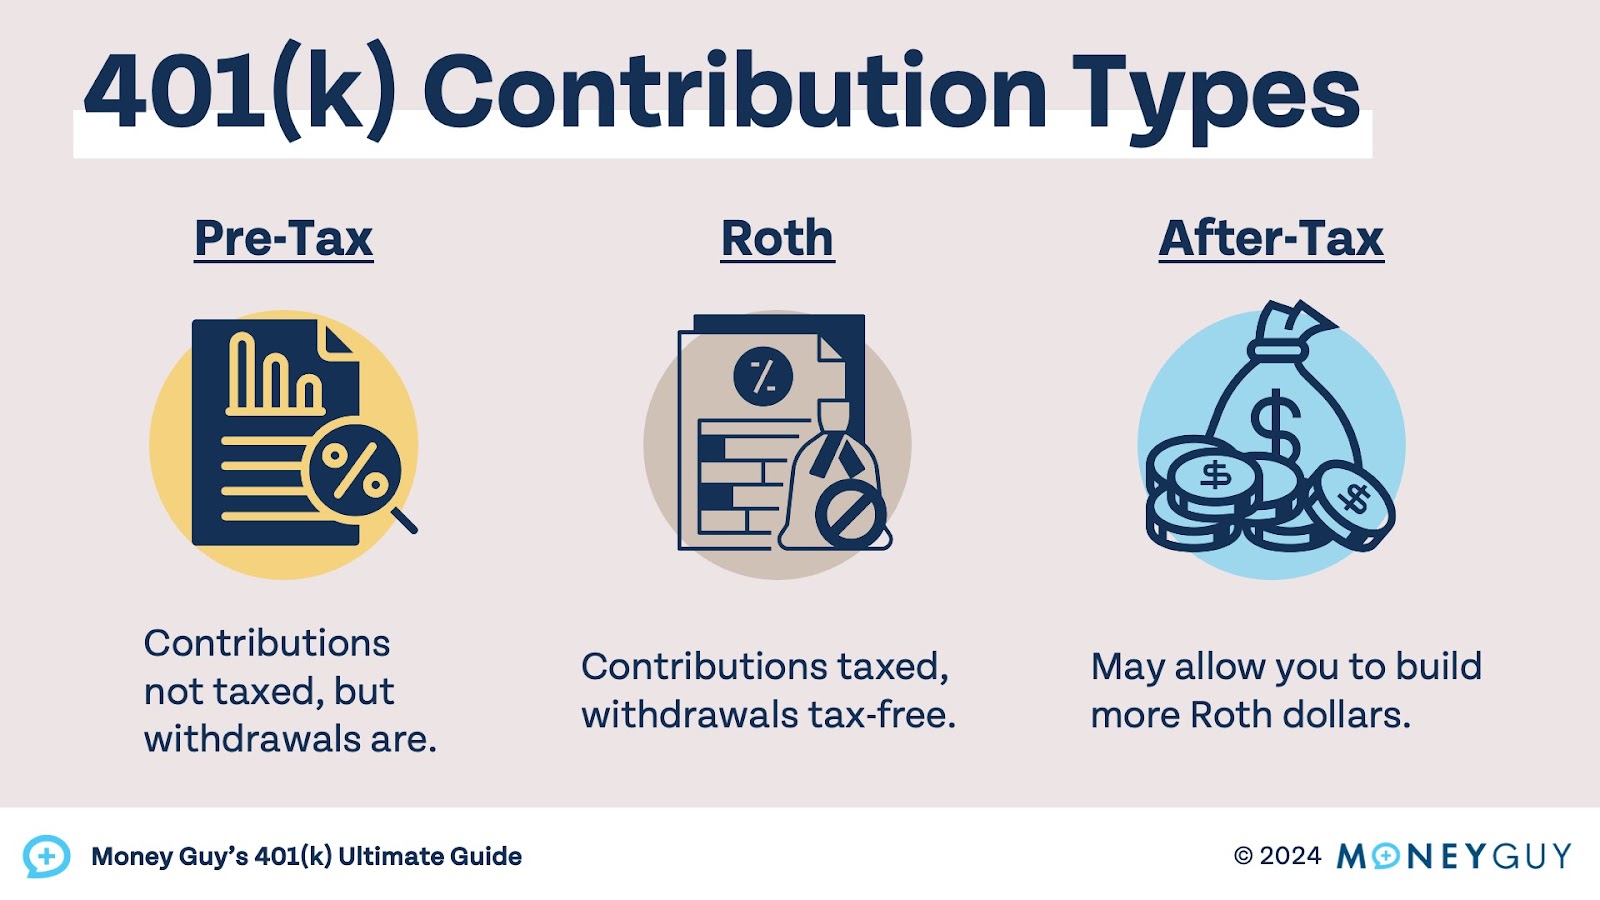 This is comparison table showing the three types of contributions to 401(k)s, pre-tax contributions, Roth contributions, and after-tax contributions.